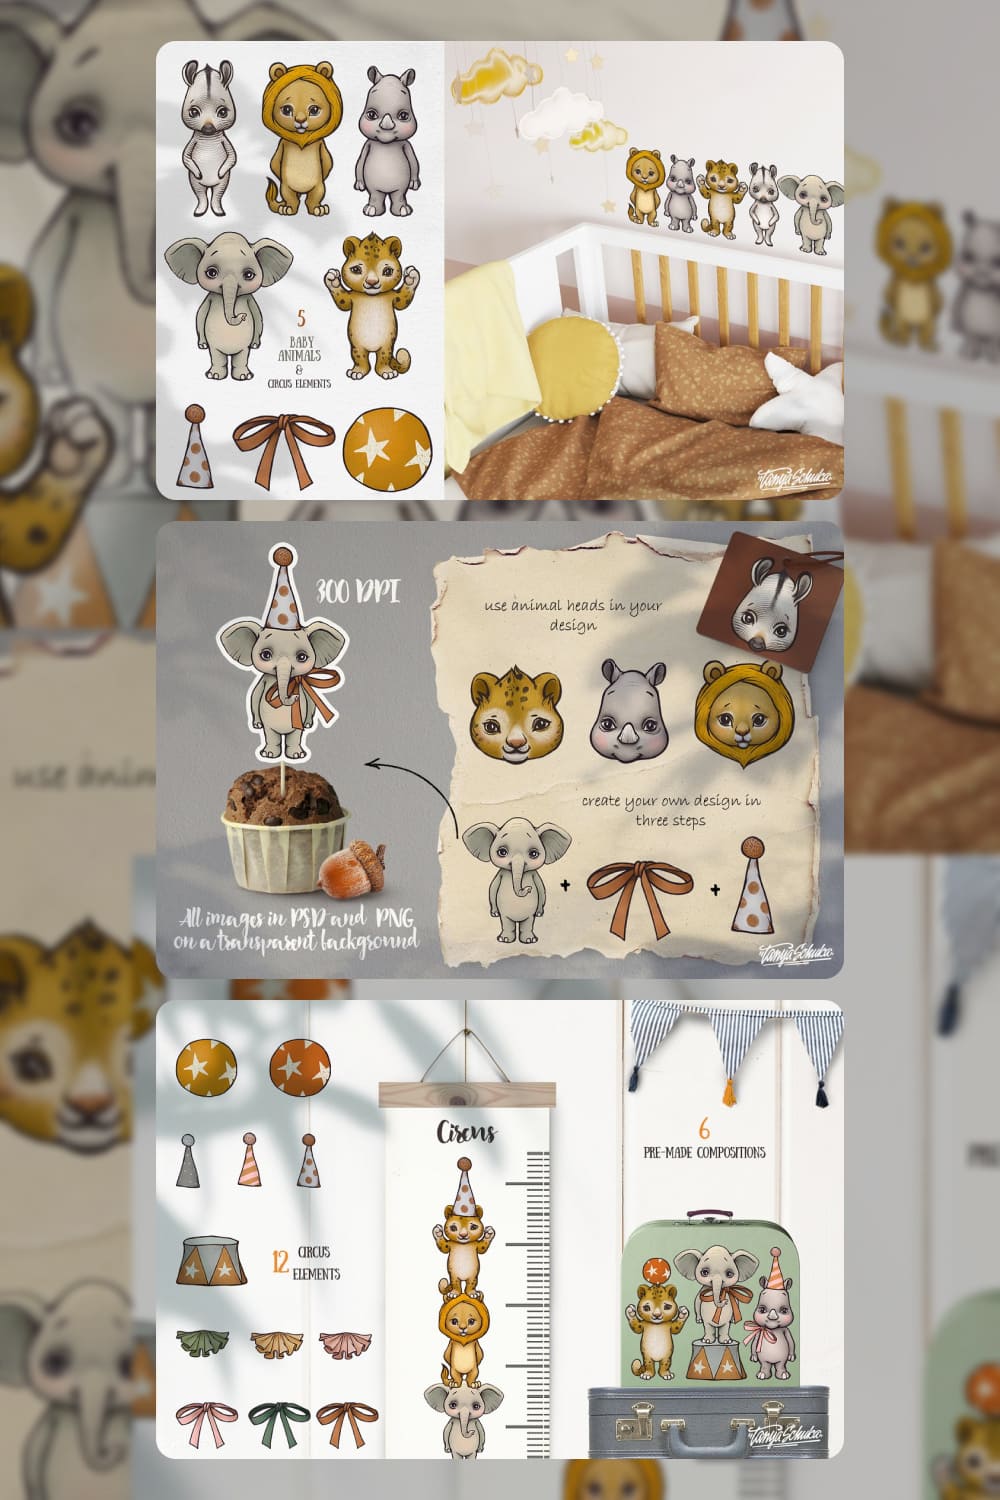 Details of the animal characters.